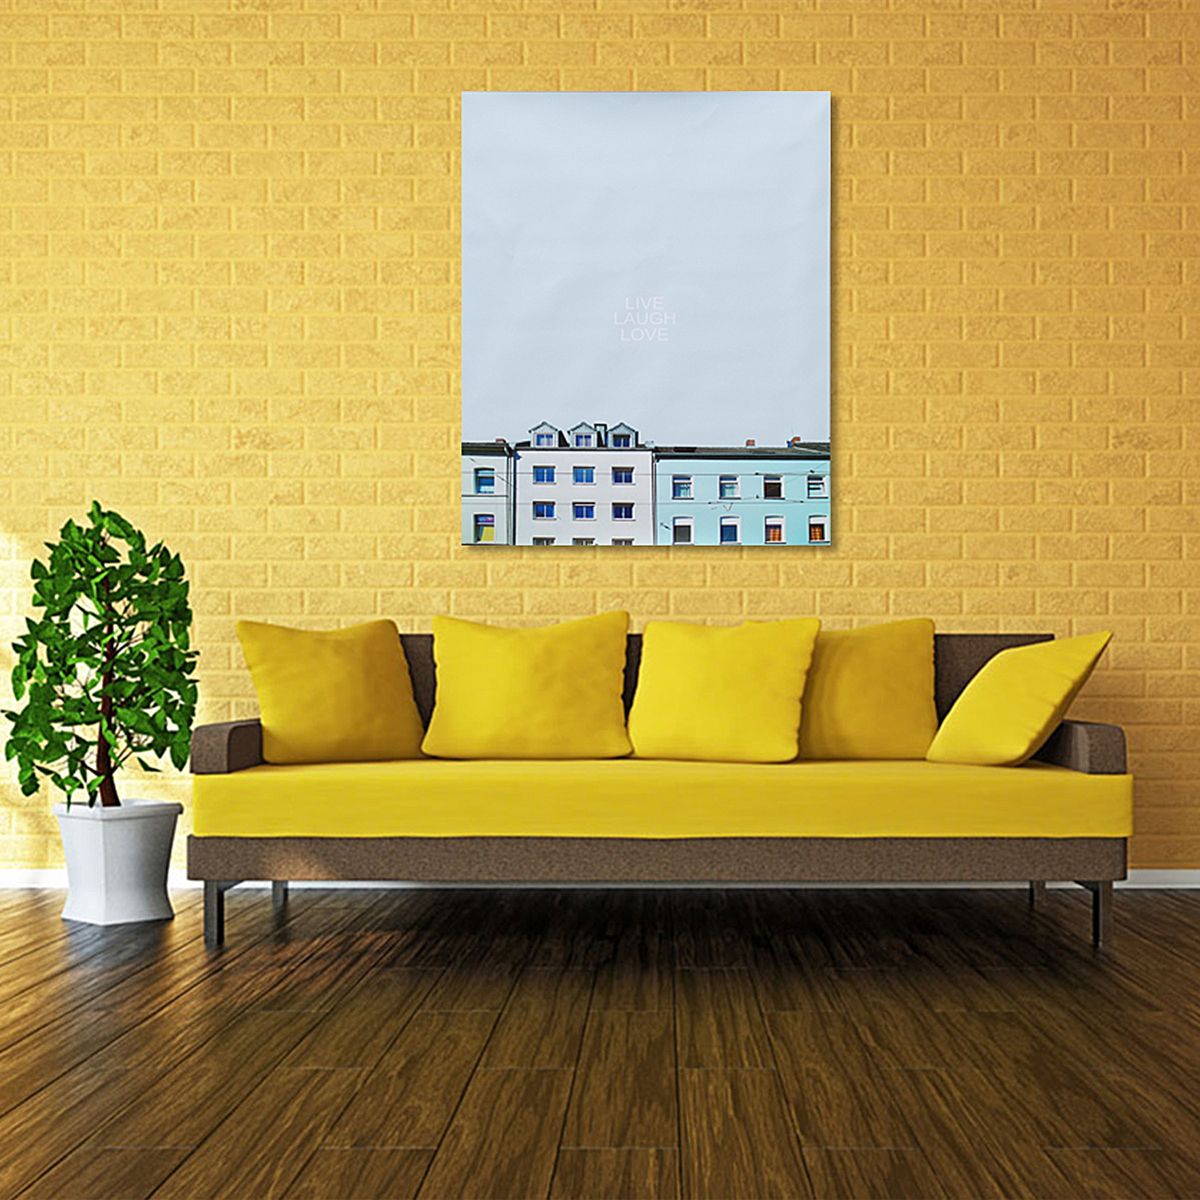 Canvas-Print-House-Painting-Decor-Bedroom-Wall-Paper-Sticker-Home-Decorations-1450172